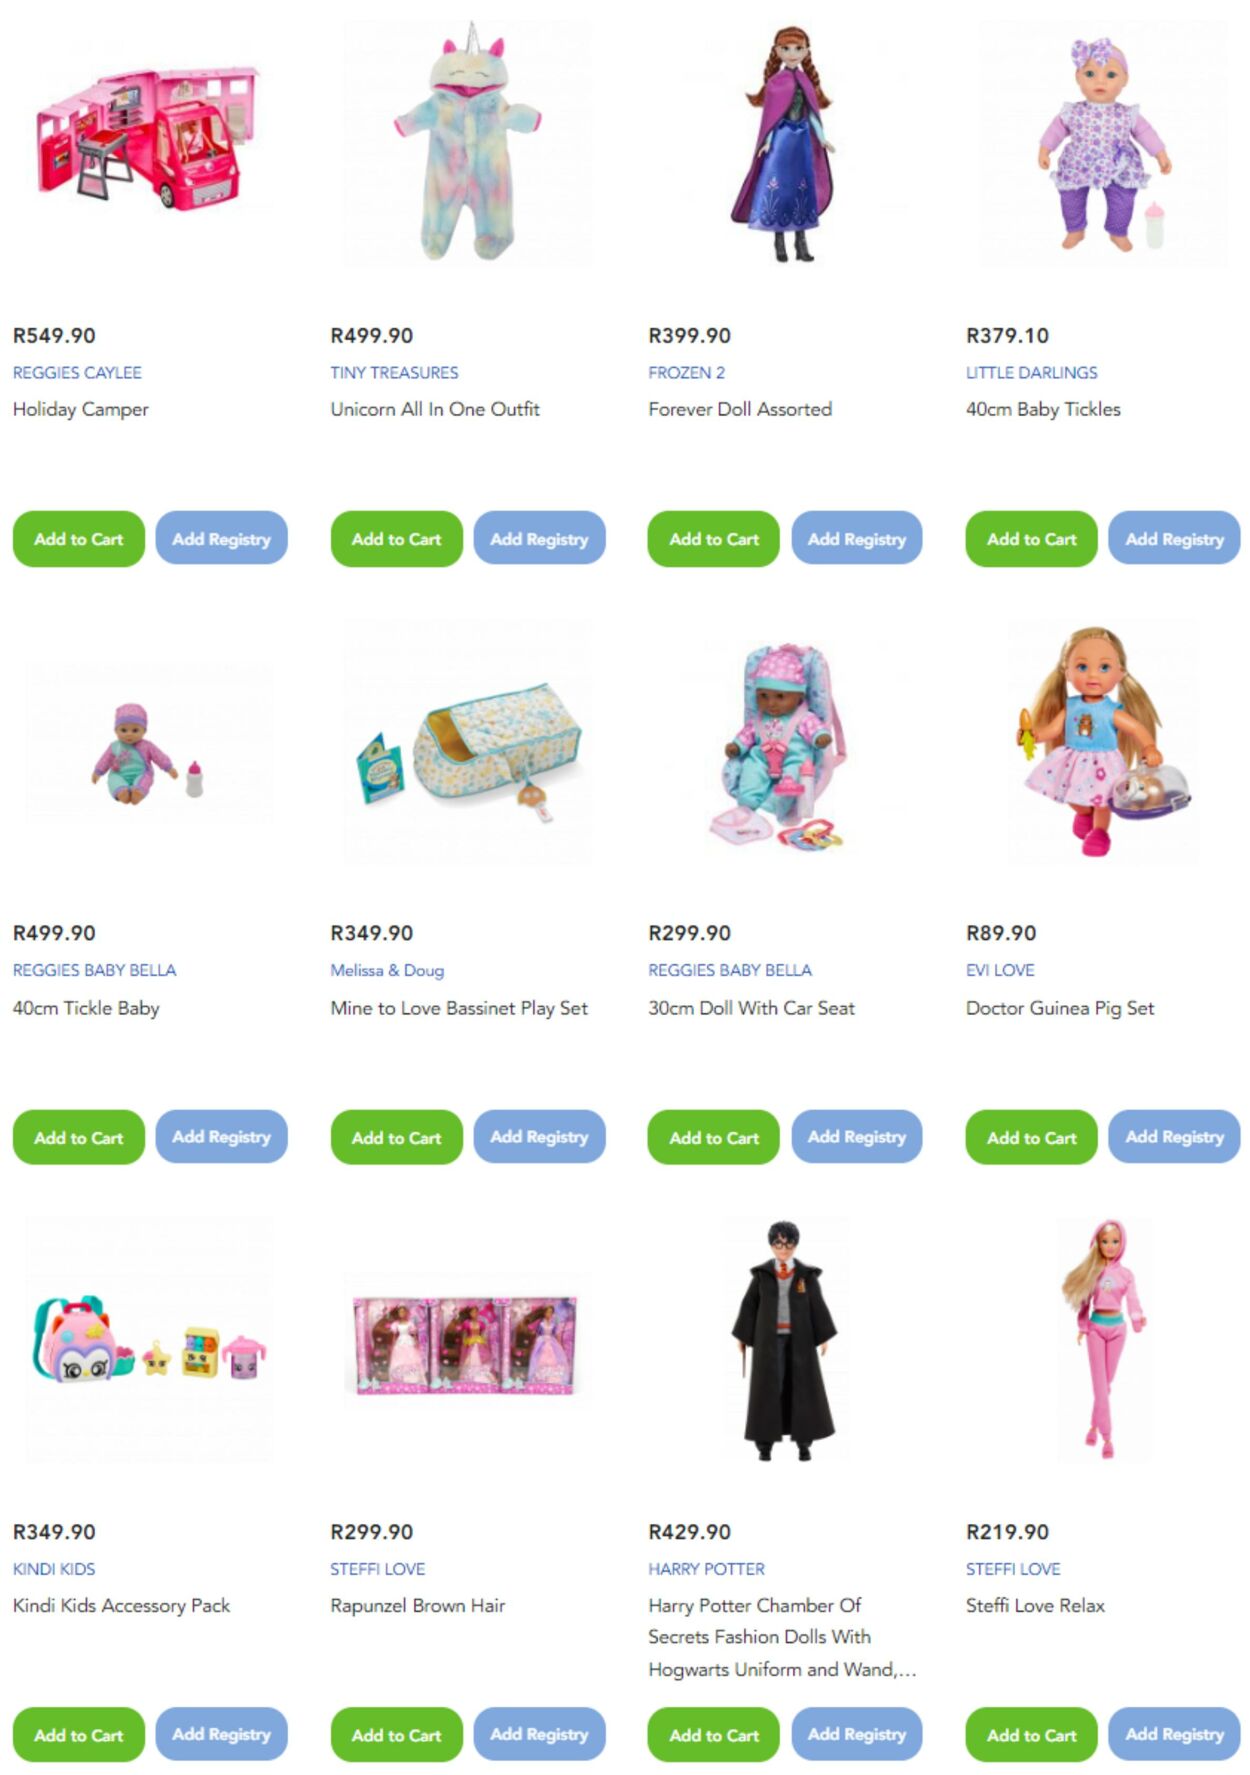 Special Toys R Us 13.06.2022 - 27.06.2022